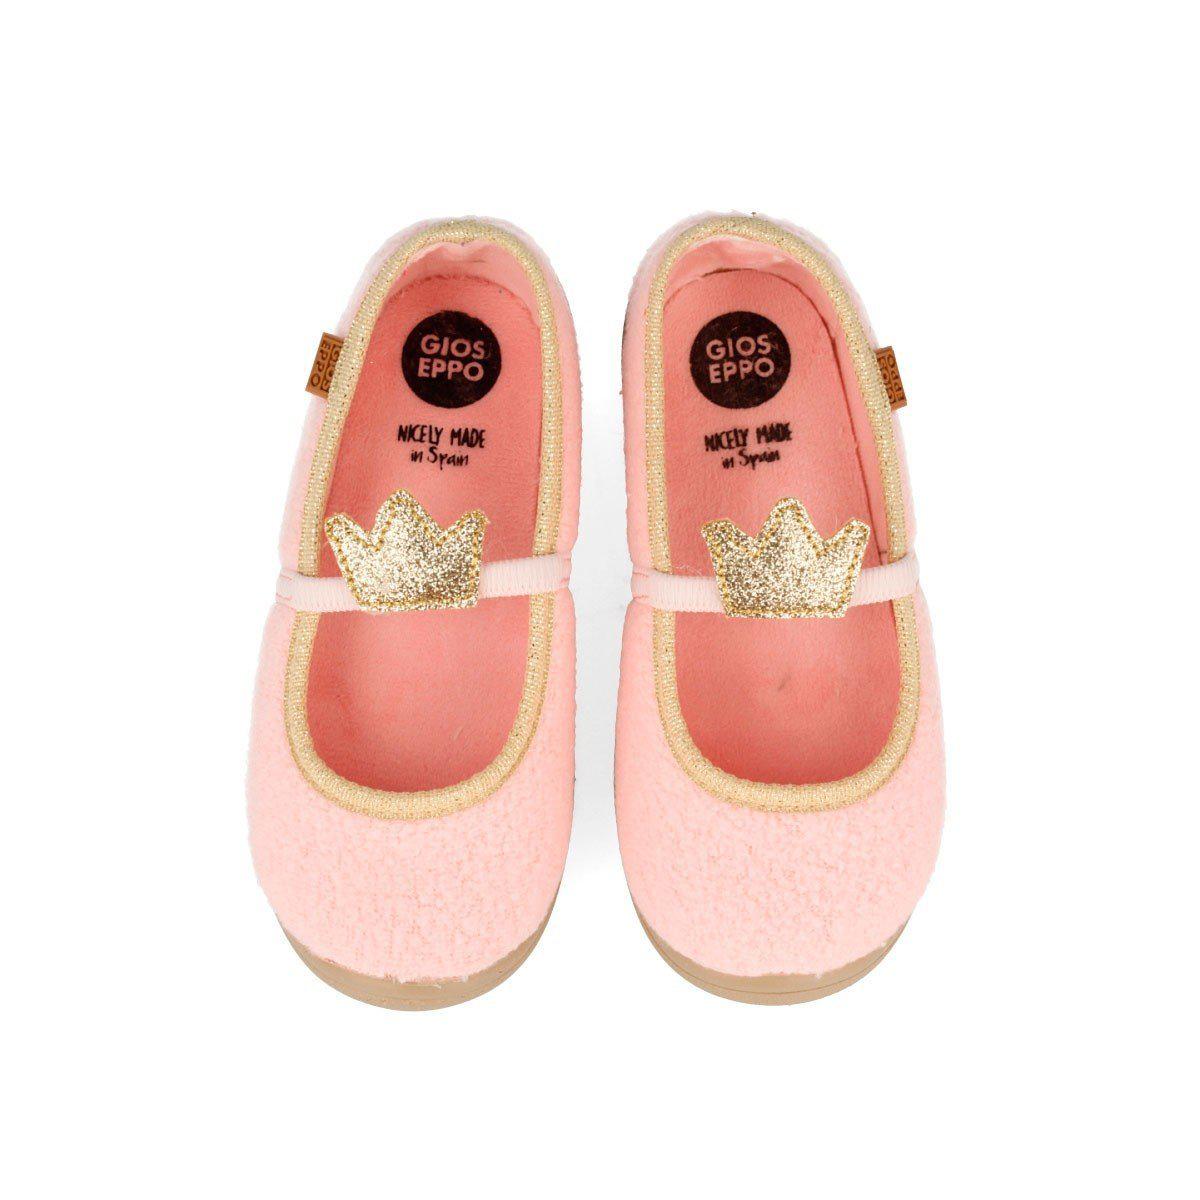 Gioseppo PINK SLIPPERS BALLERINA STYLE FOR GIRLS - TheShoeZoo